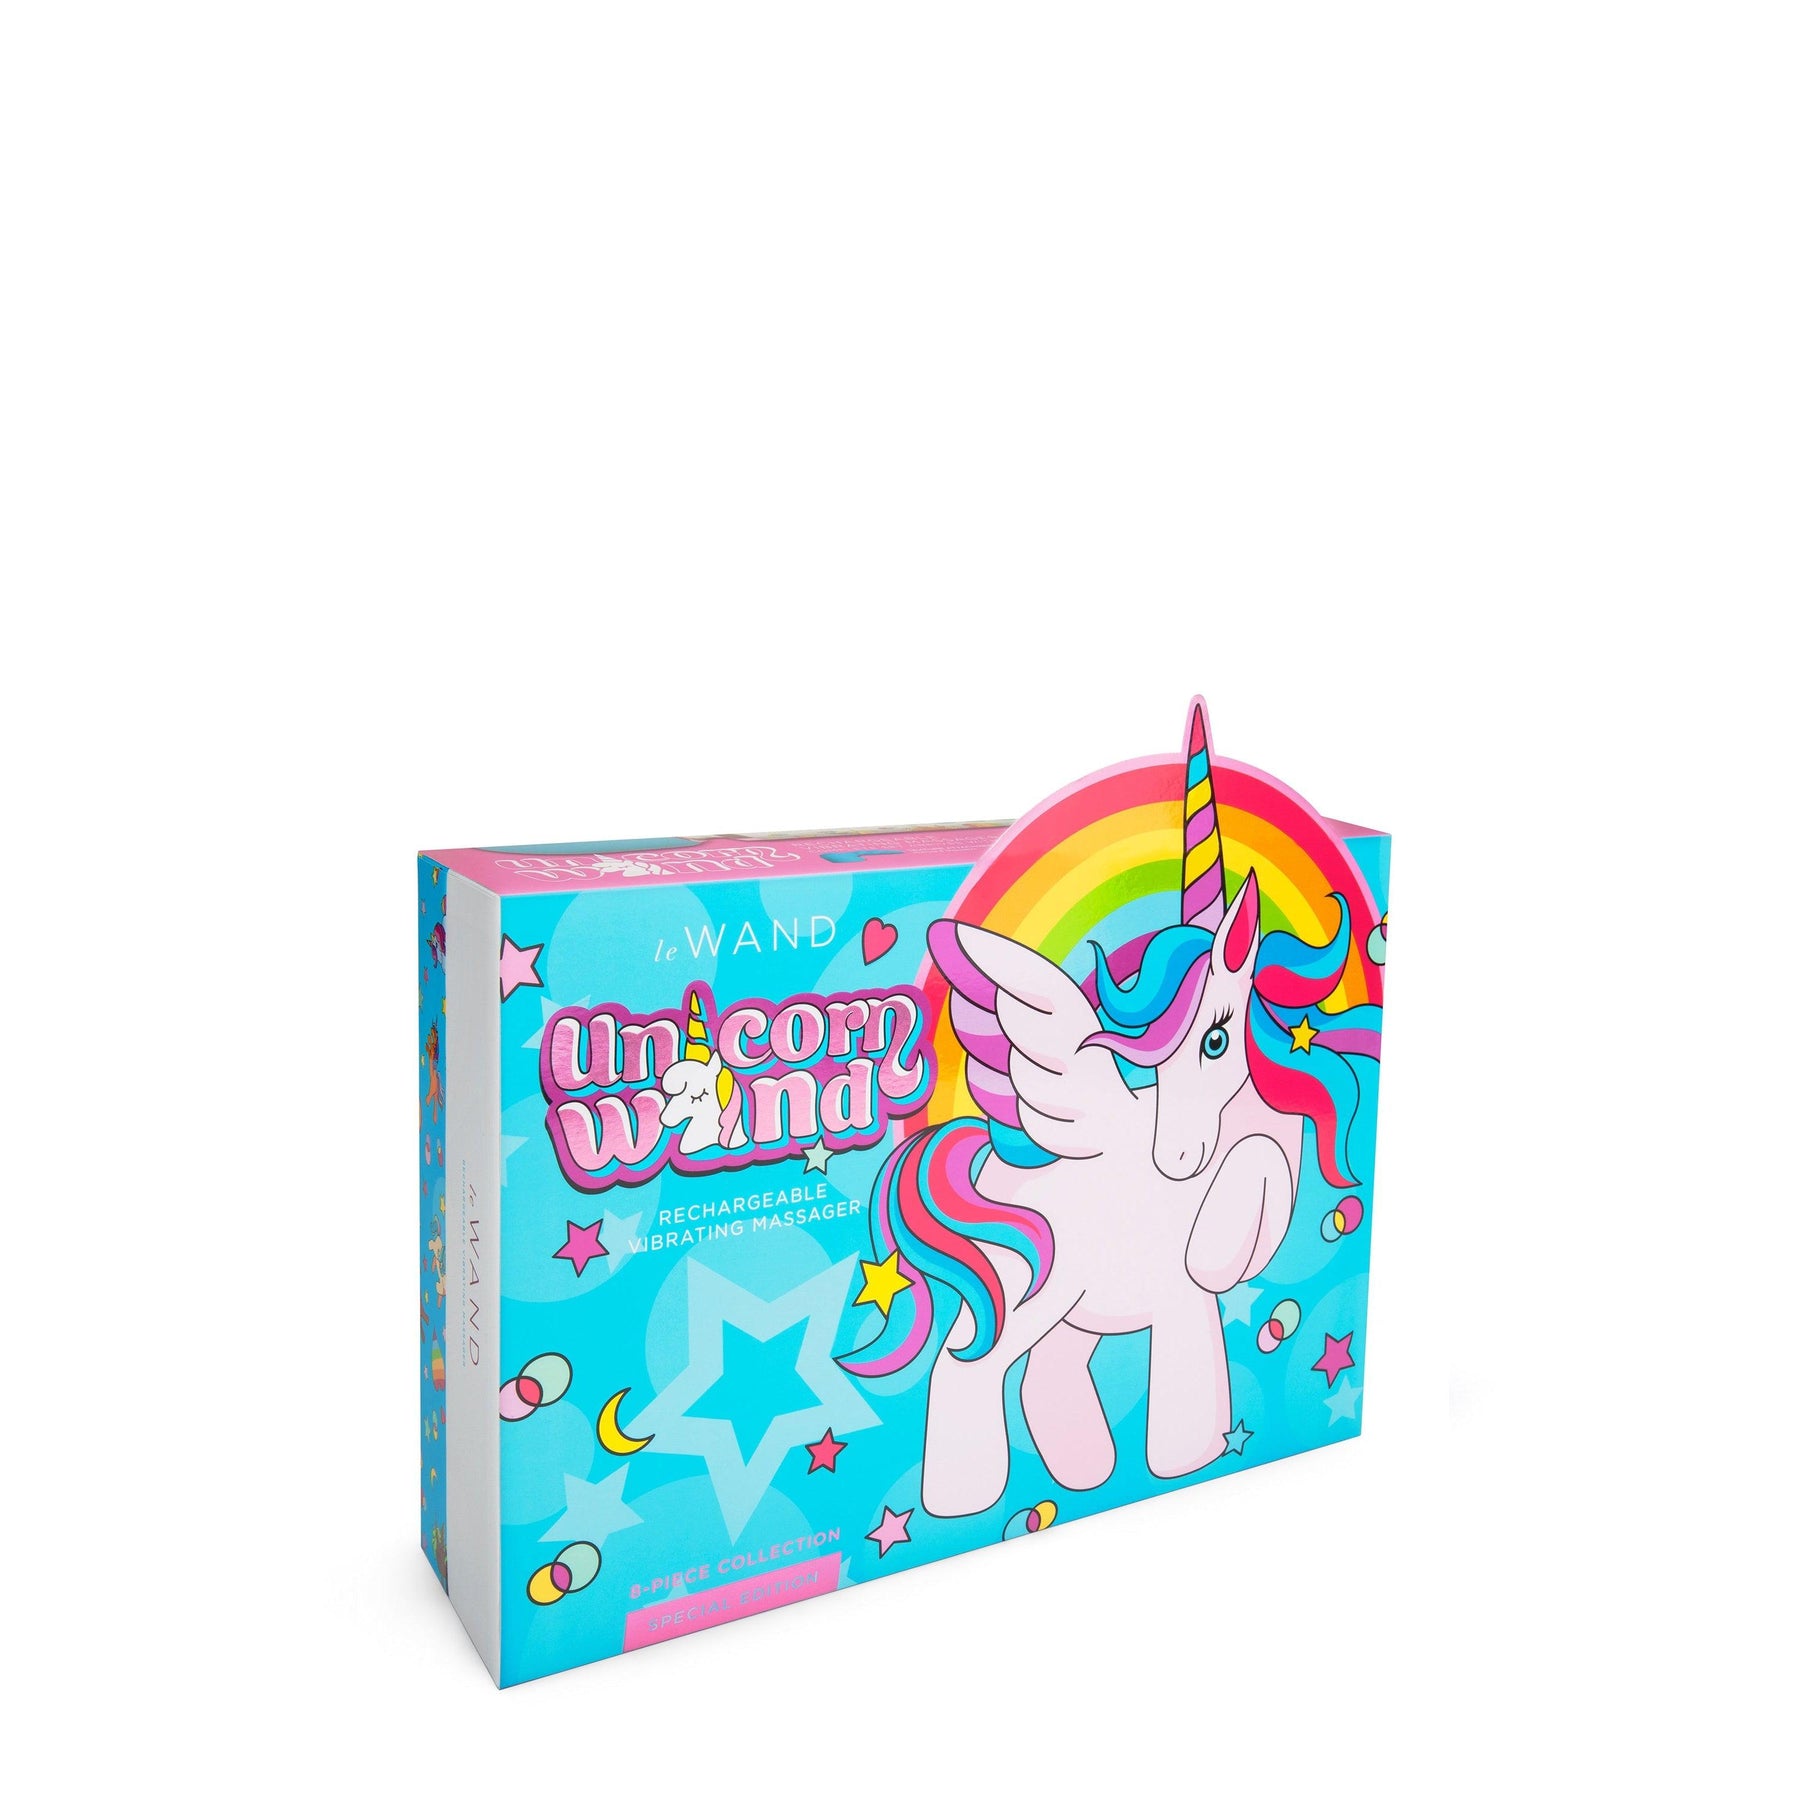 Unicorn Wand Limited Edition 8pc Collection